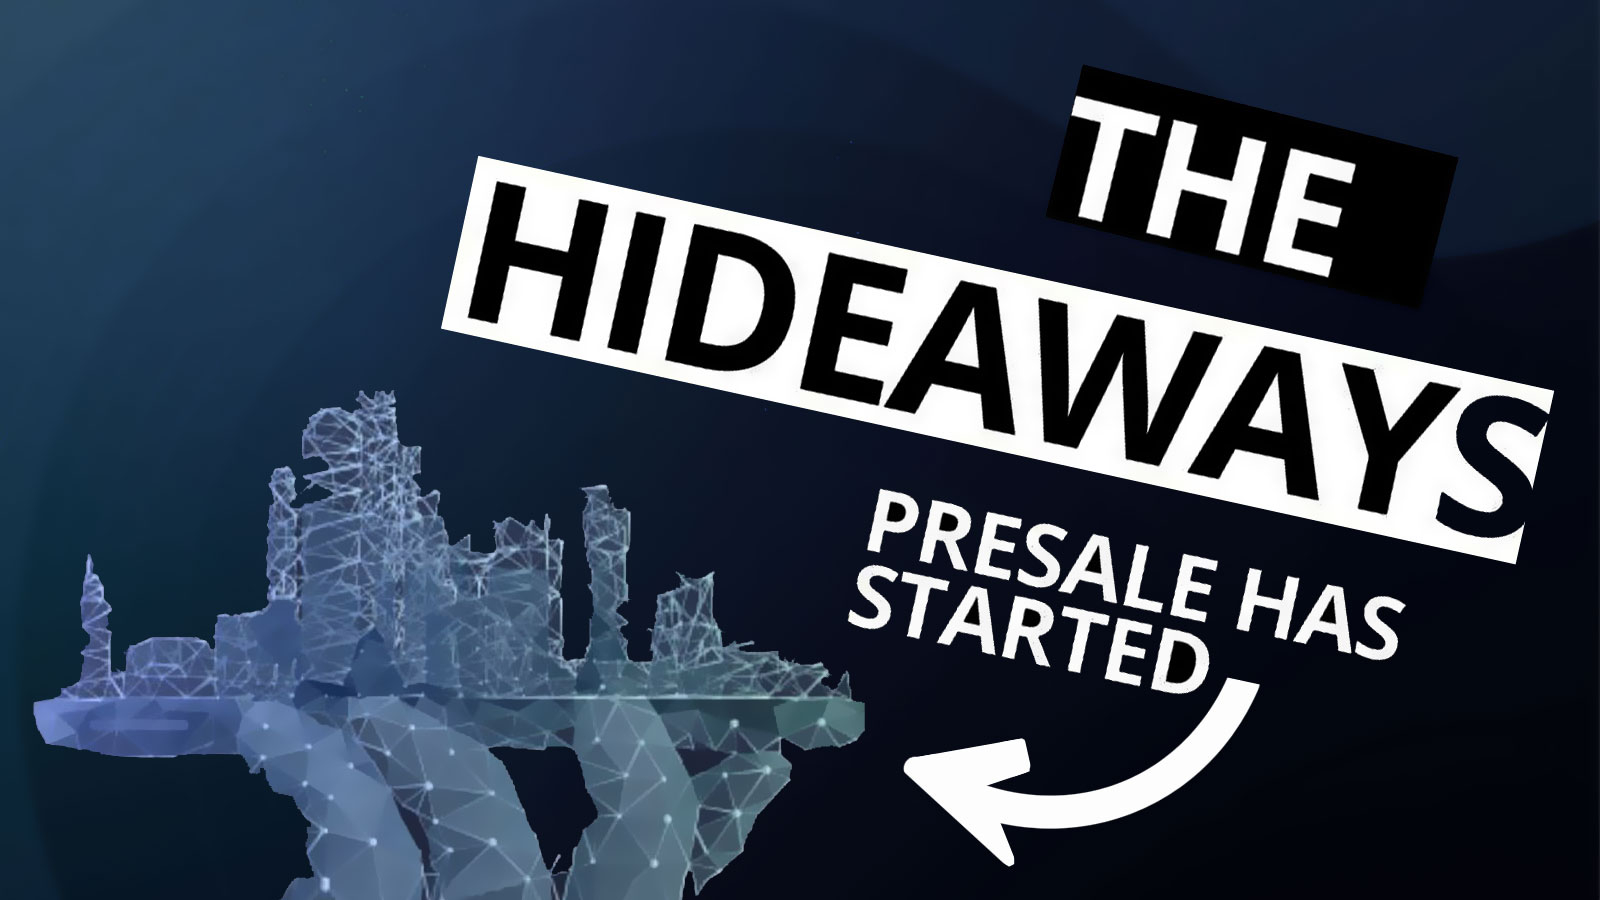 The Hideaways (HDWY) Launches in Pre-Sale as Polygon (MATIC) and Avalanche (AVAX) Ready for New Gains in September, 2022